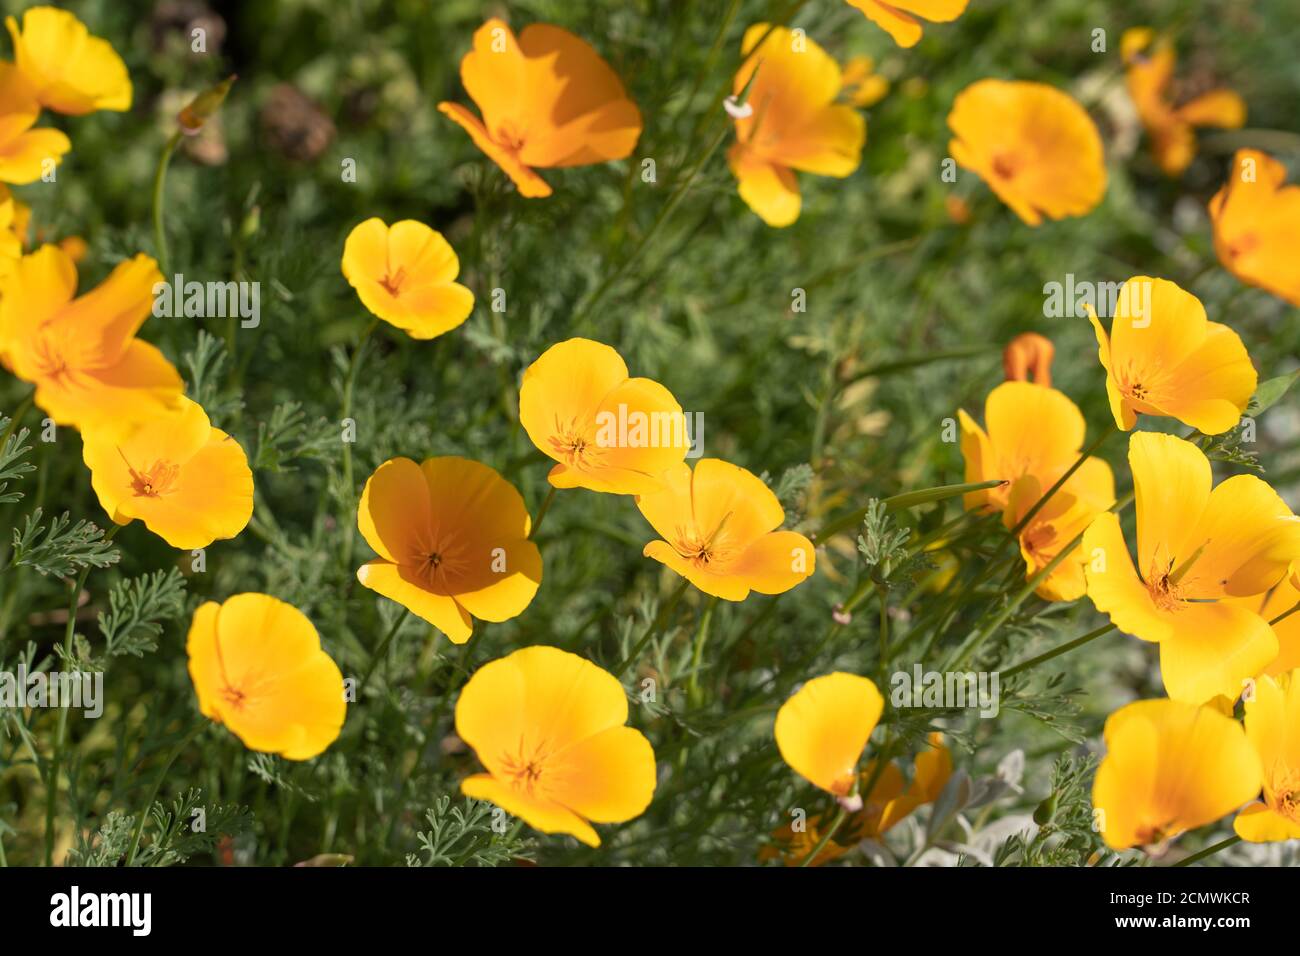 Eschscholzia californica, the California poppy, golden poppy, California sunlight or cup of gold, is a flowering plant in the family Papaveraceae Stock Photo